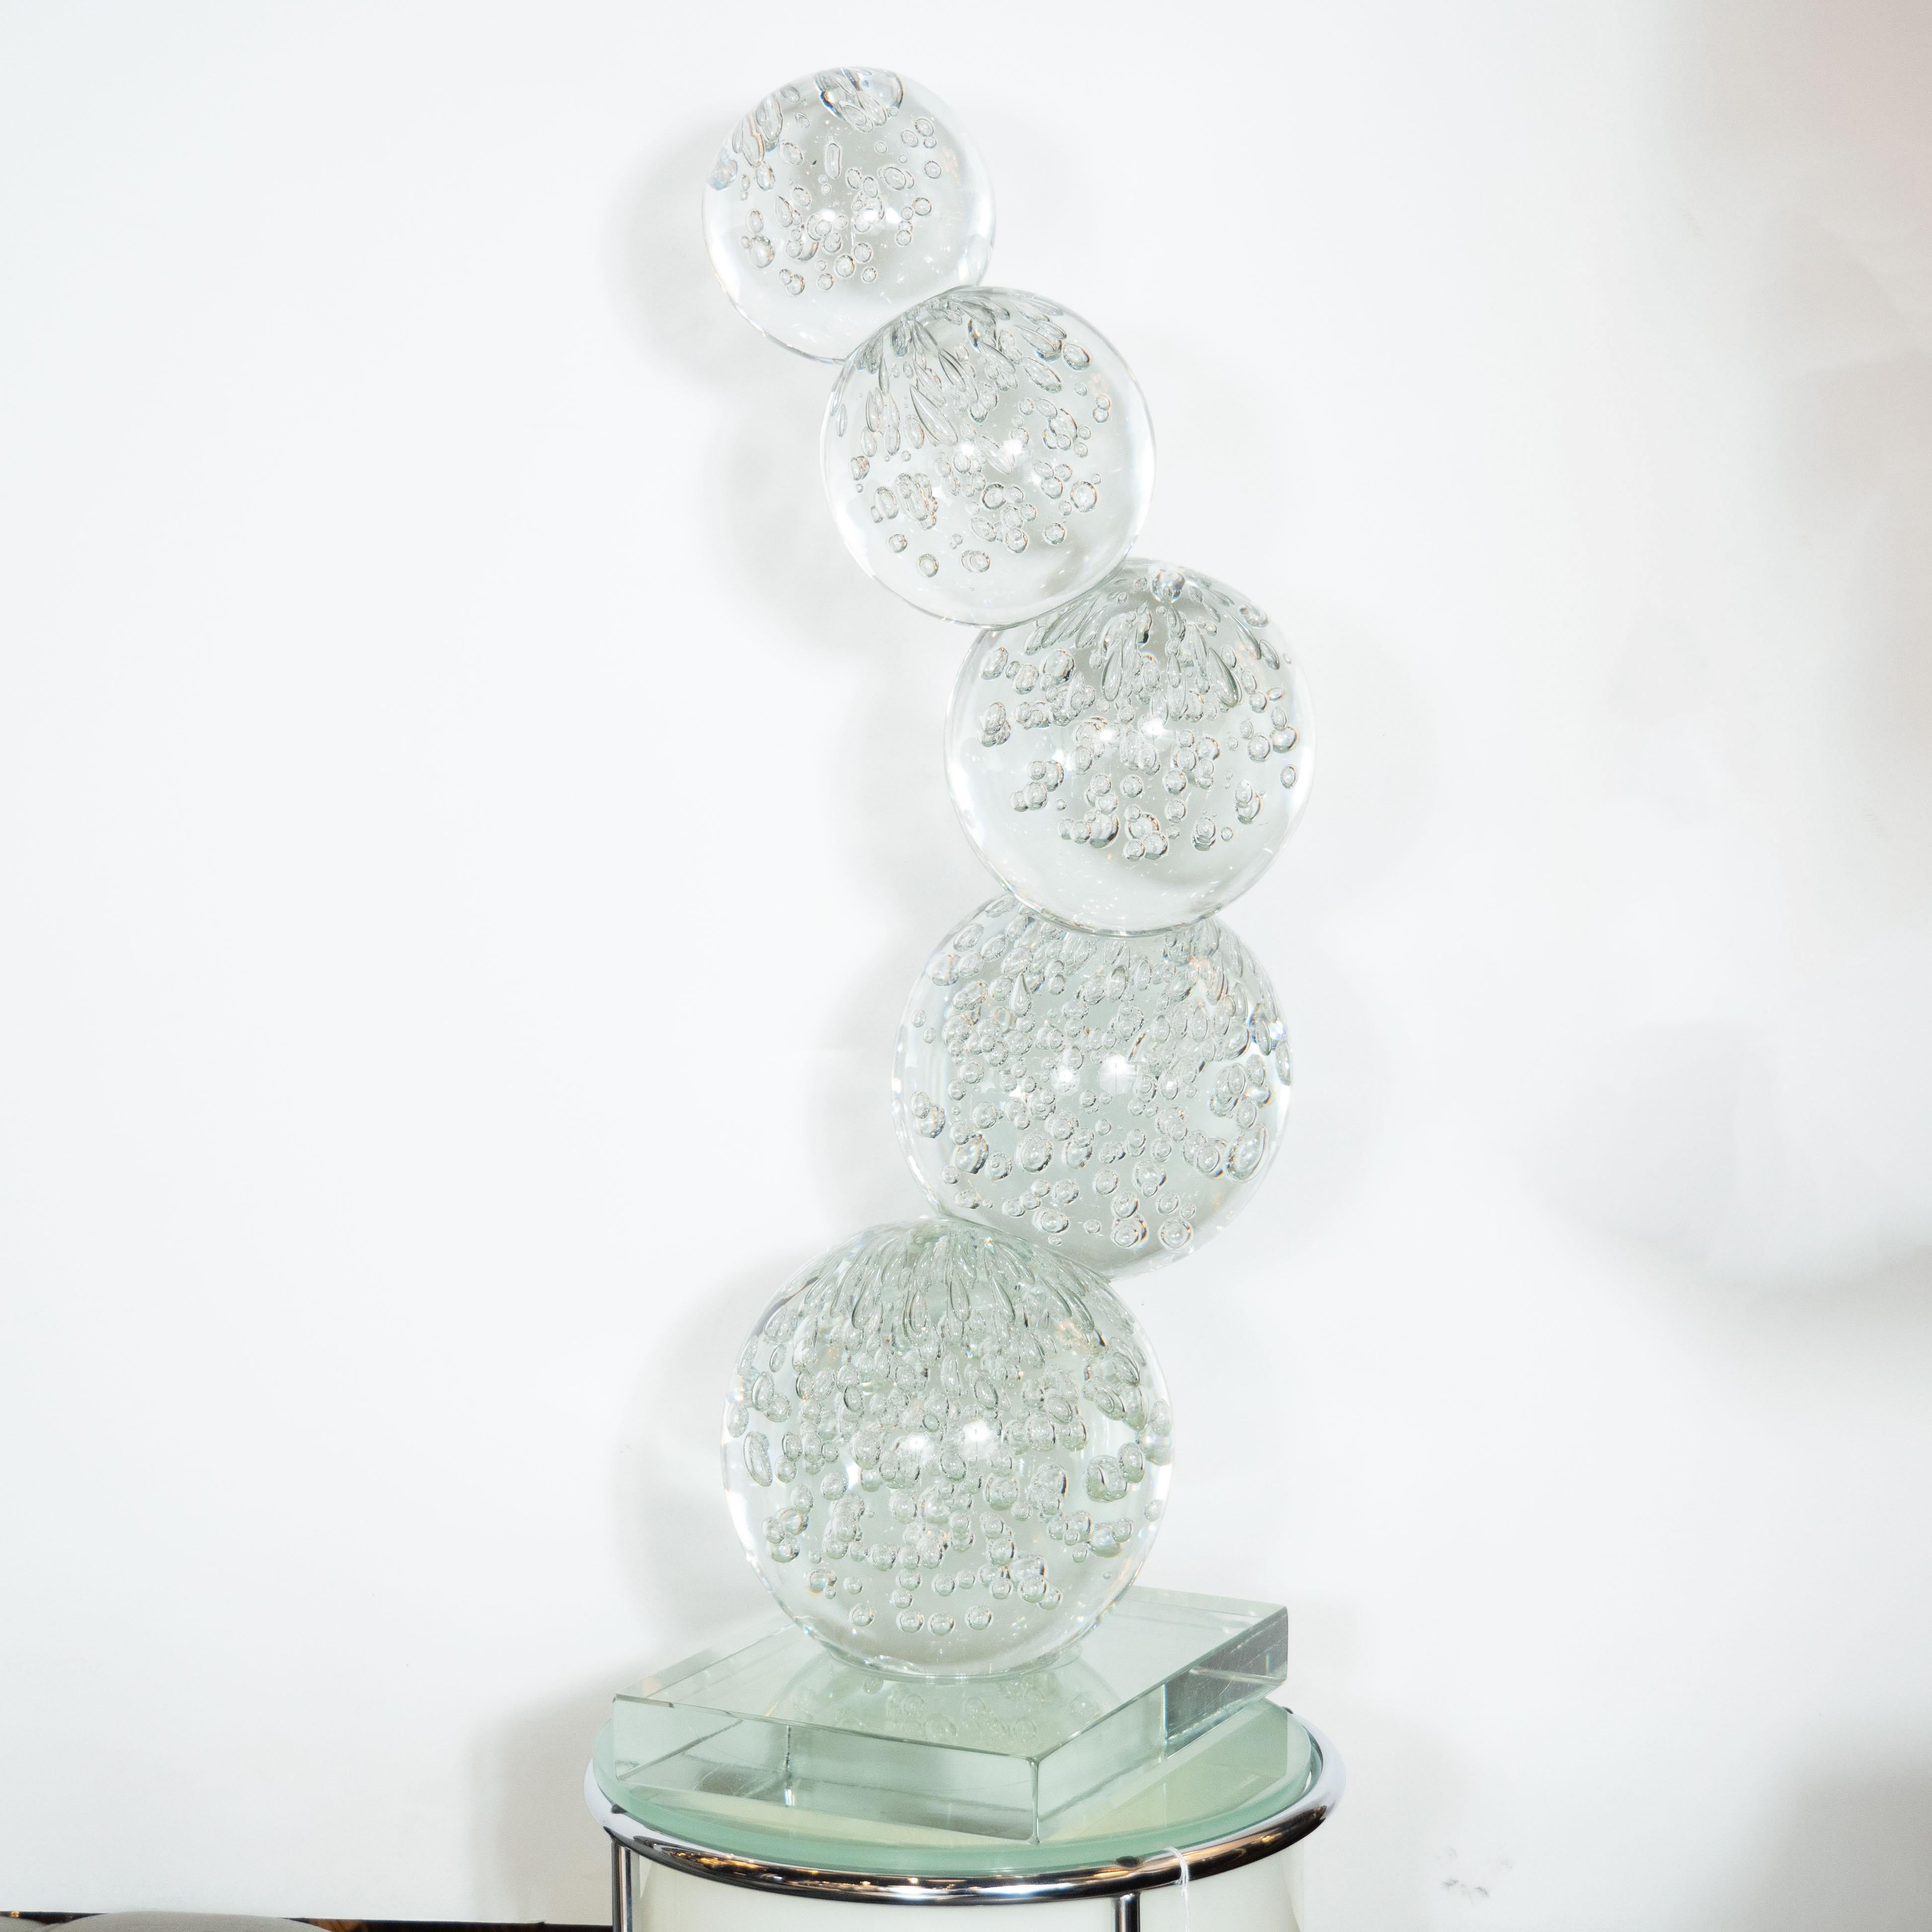 Contemporary Modernist Hand Blown Murano Translucent Bubble Glass Stacked Spheres Sculpture